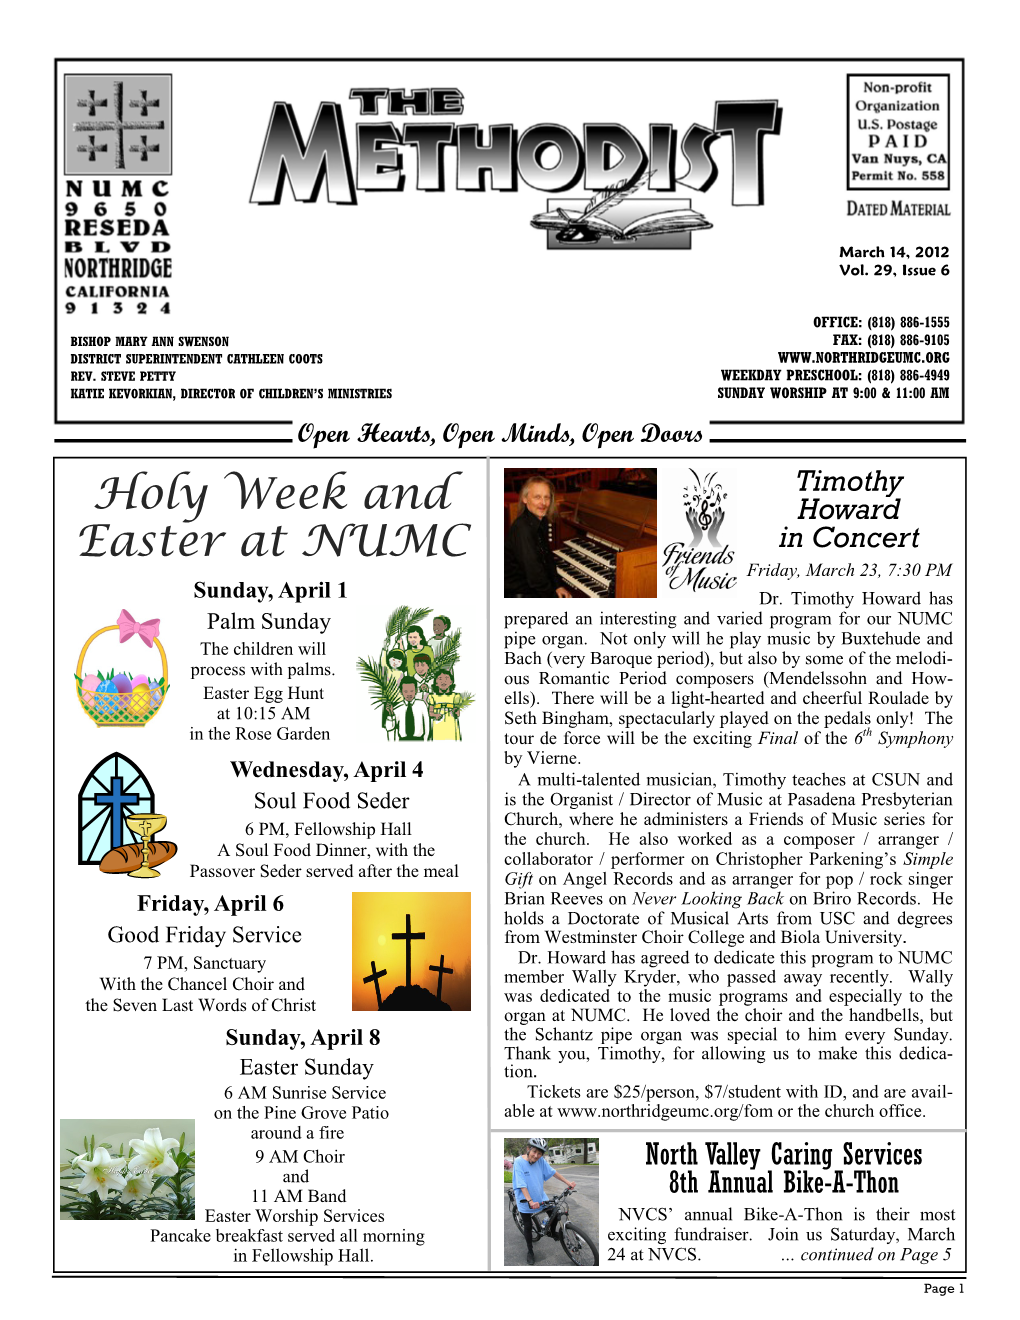 Holy Week and Easter at NUMC